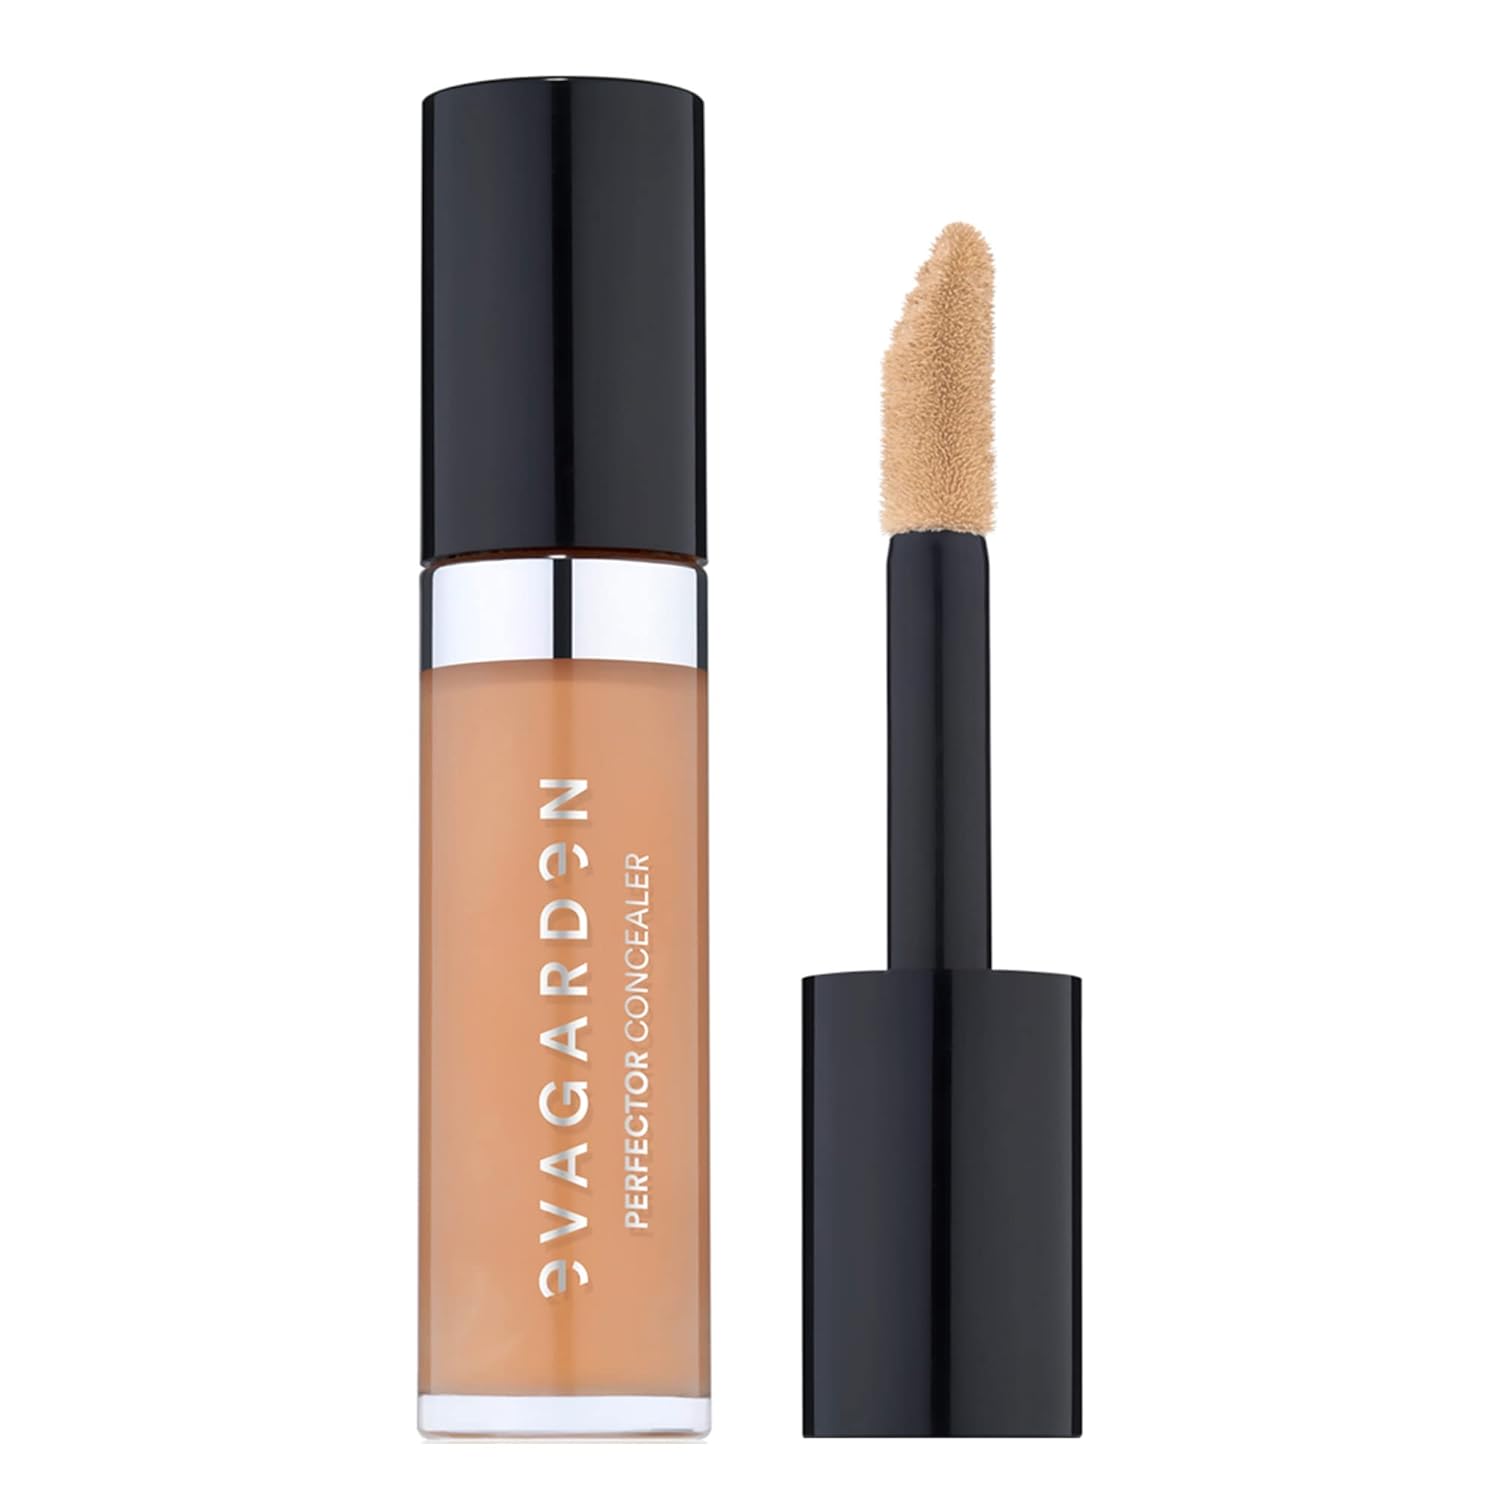 EVAGARDEN Perfector Concealer - Multi-Purpose Product with Moisturizing Properties - Touches Up, Defines, Enhances and Sculpts - Light and Creamy Texture with Rich Color - 333 Medium Amber - 0.16